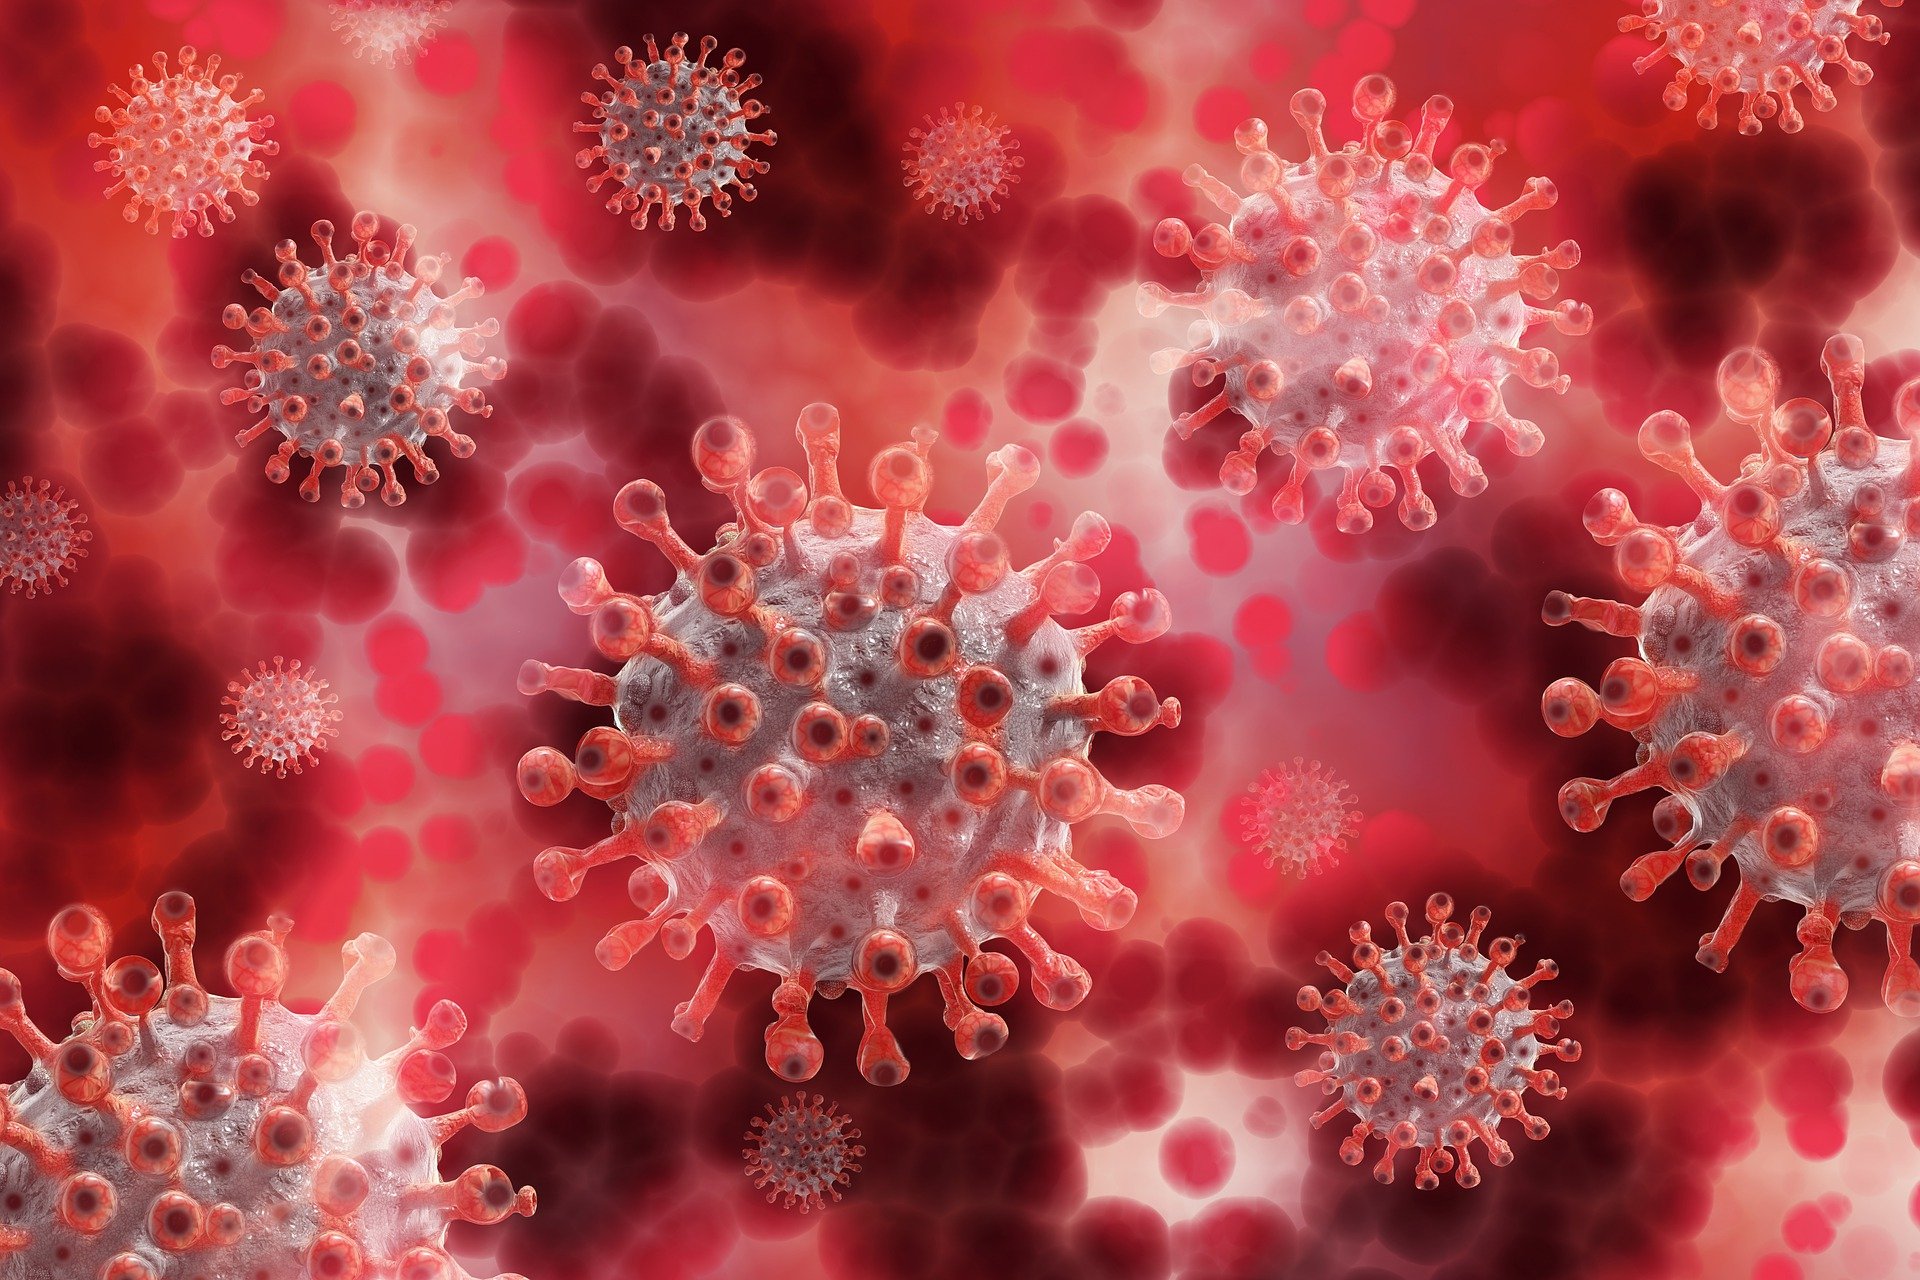 How Much Do You Know About The Coronavirus